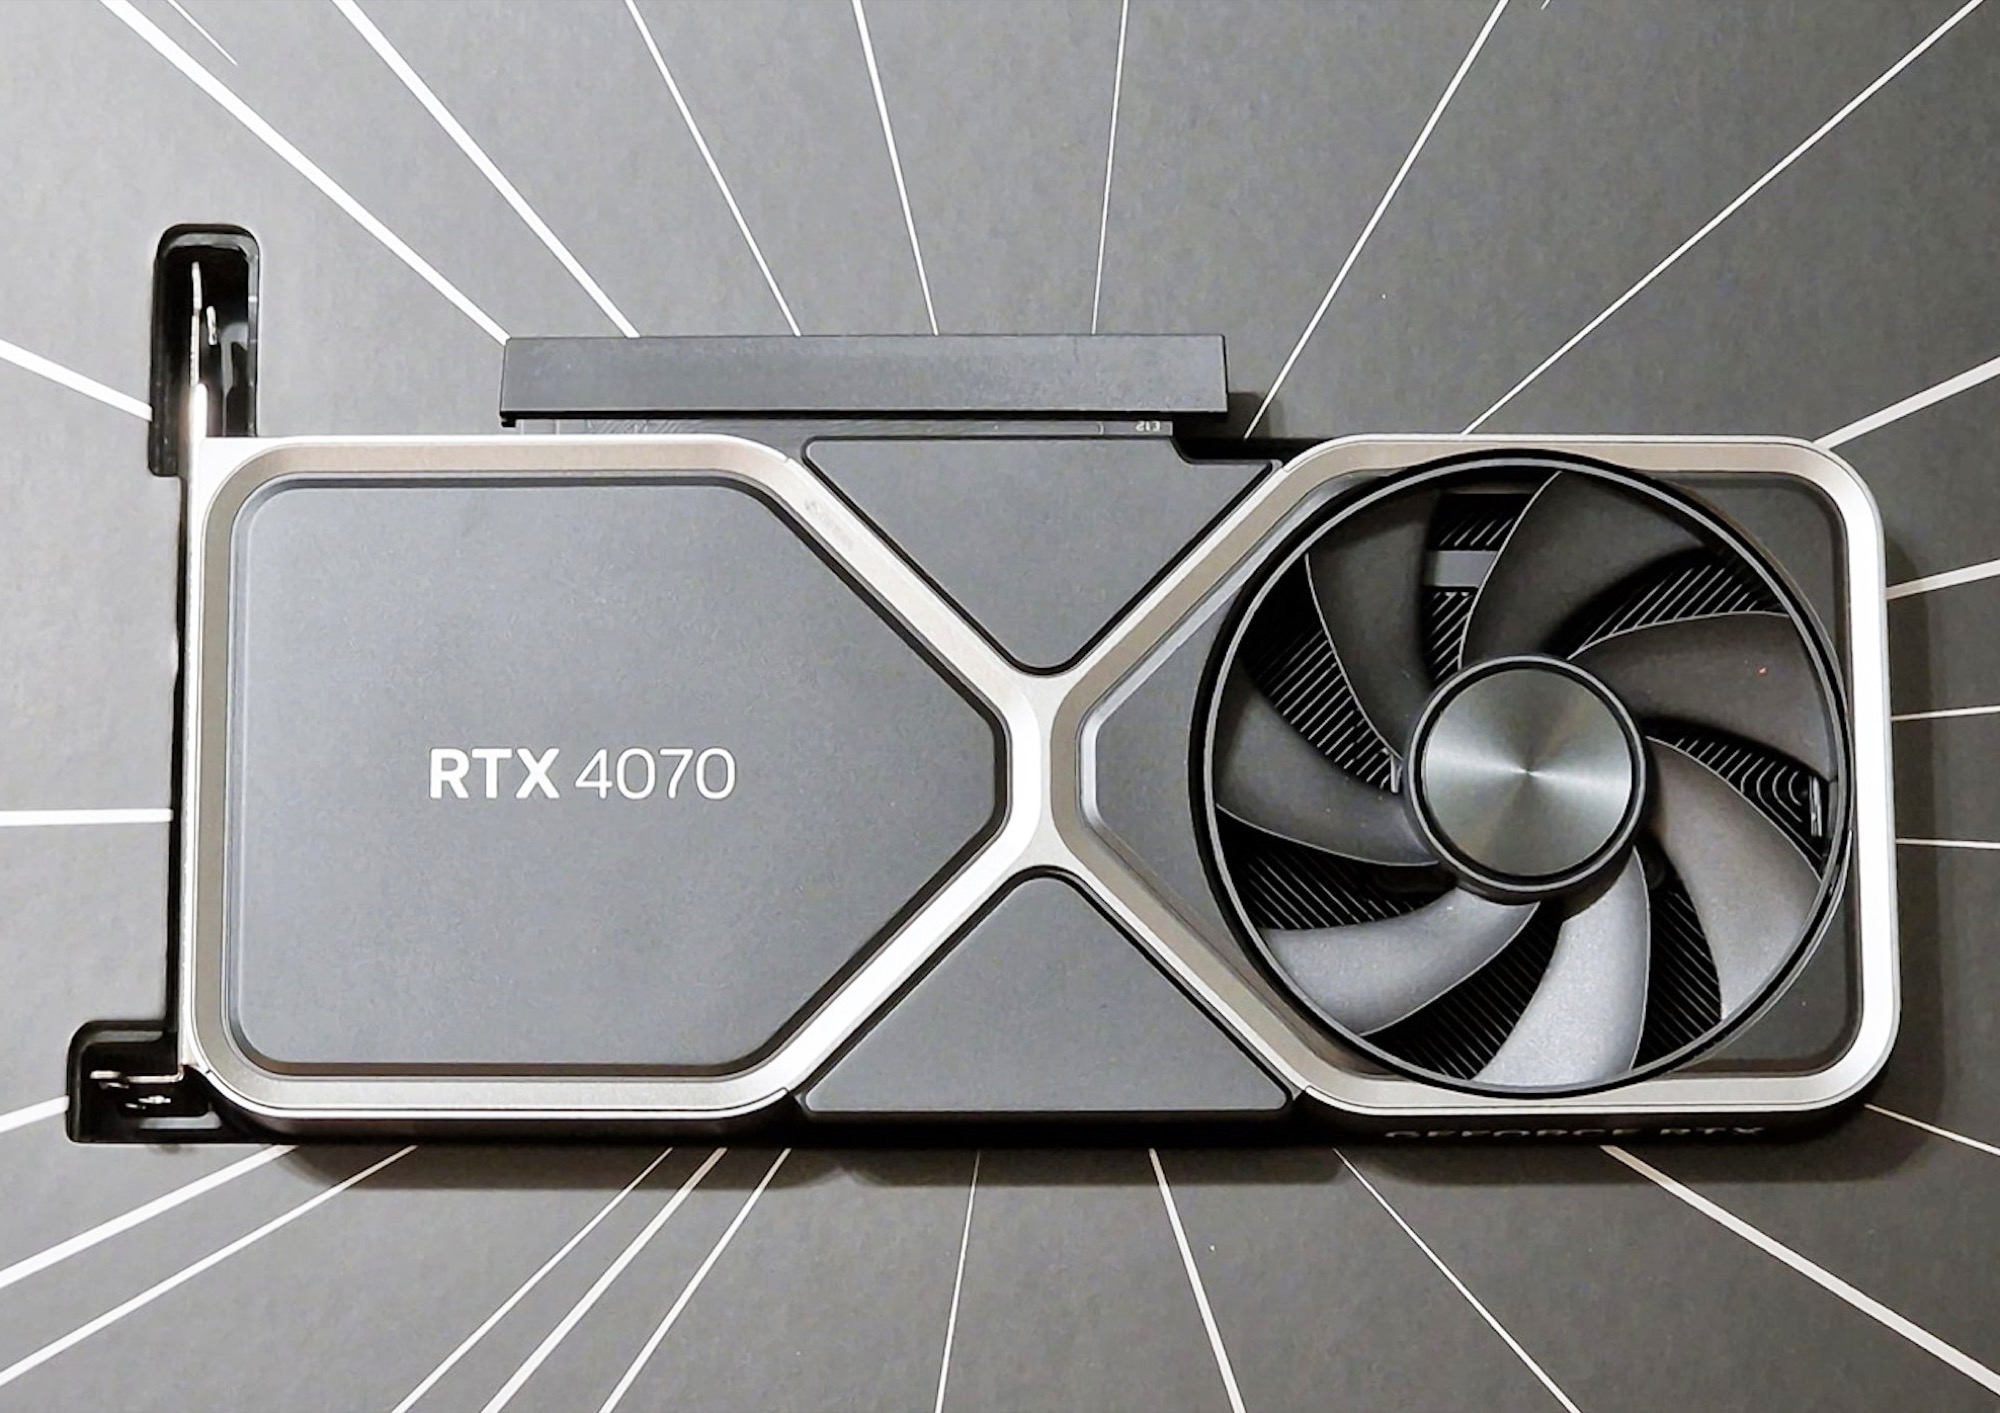 NVIDIA GeForce RTX 4070: New leaked official benchmark data